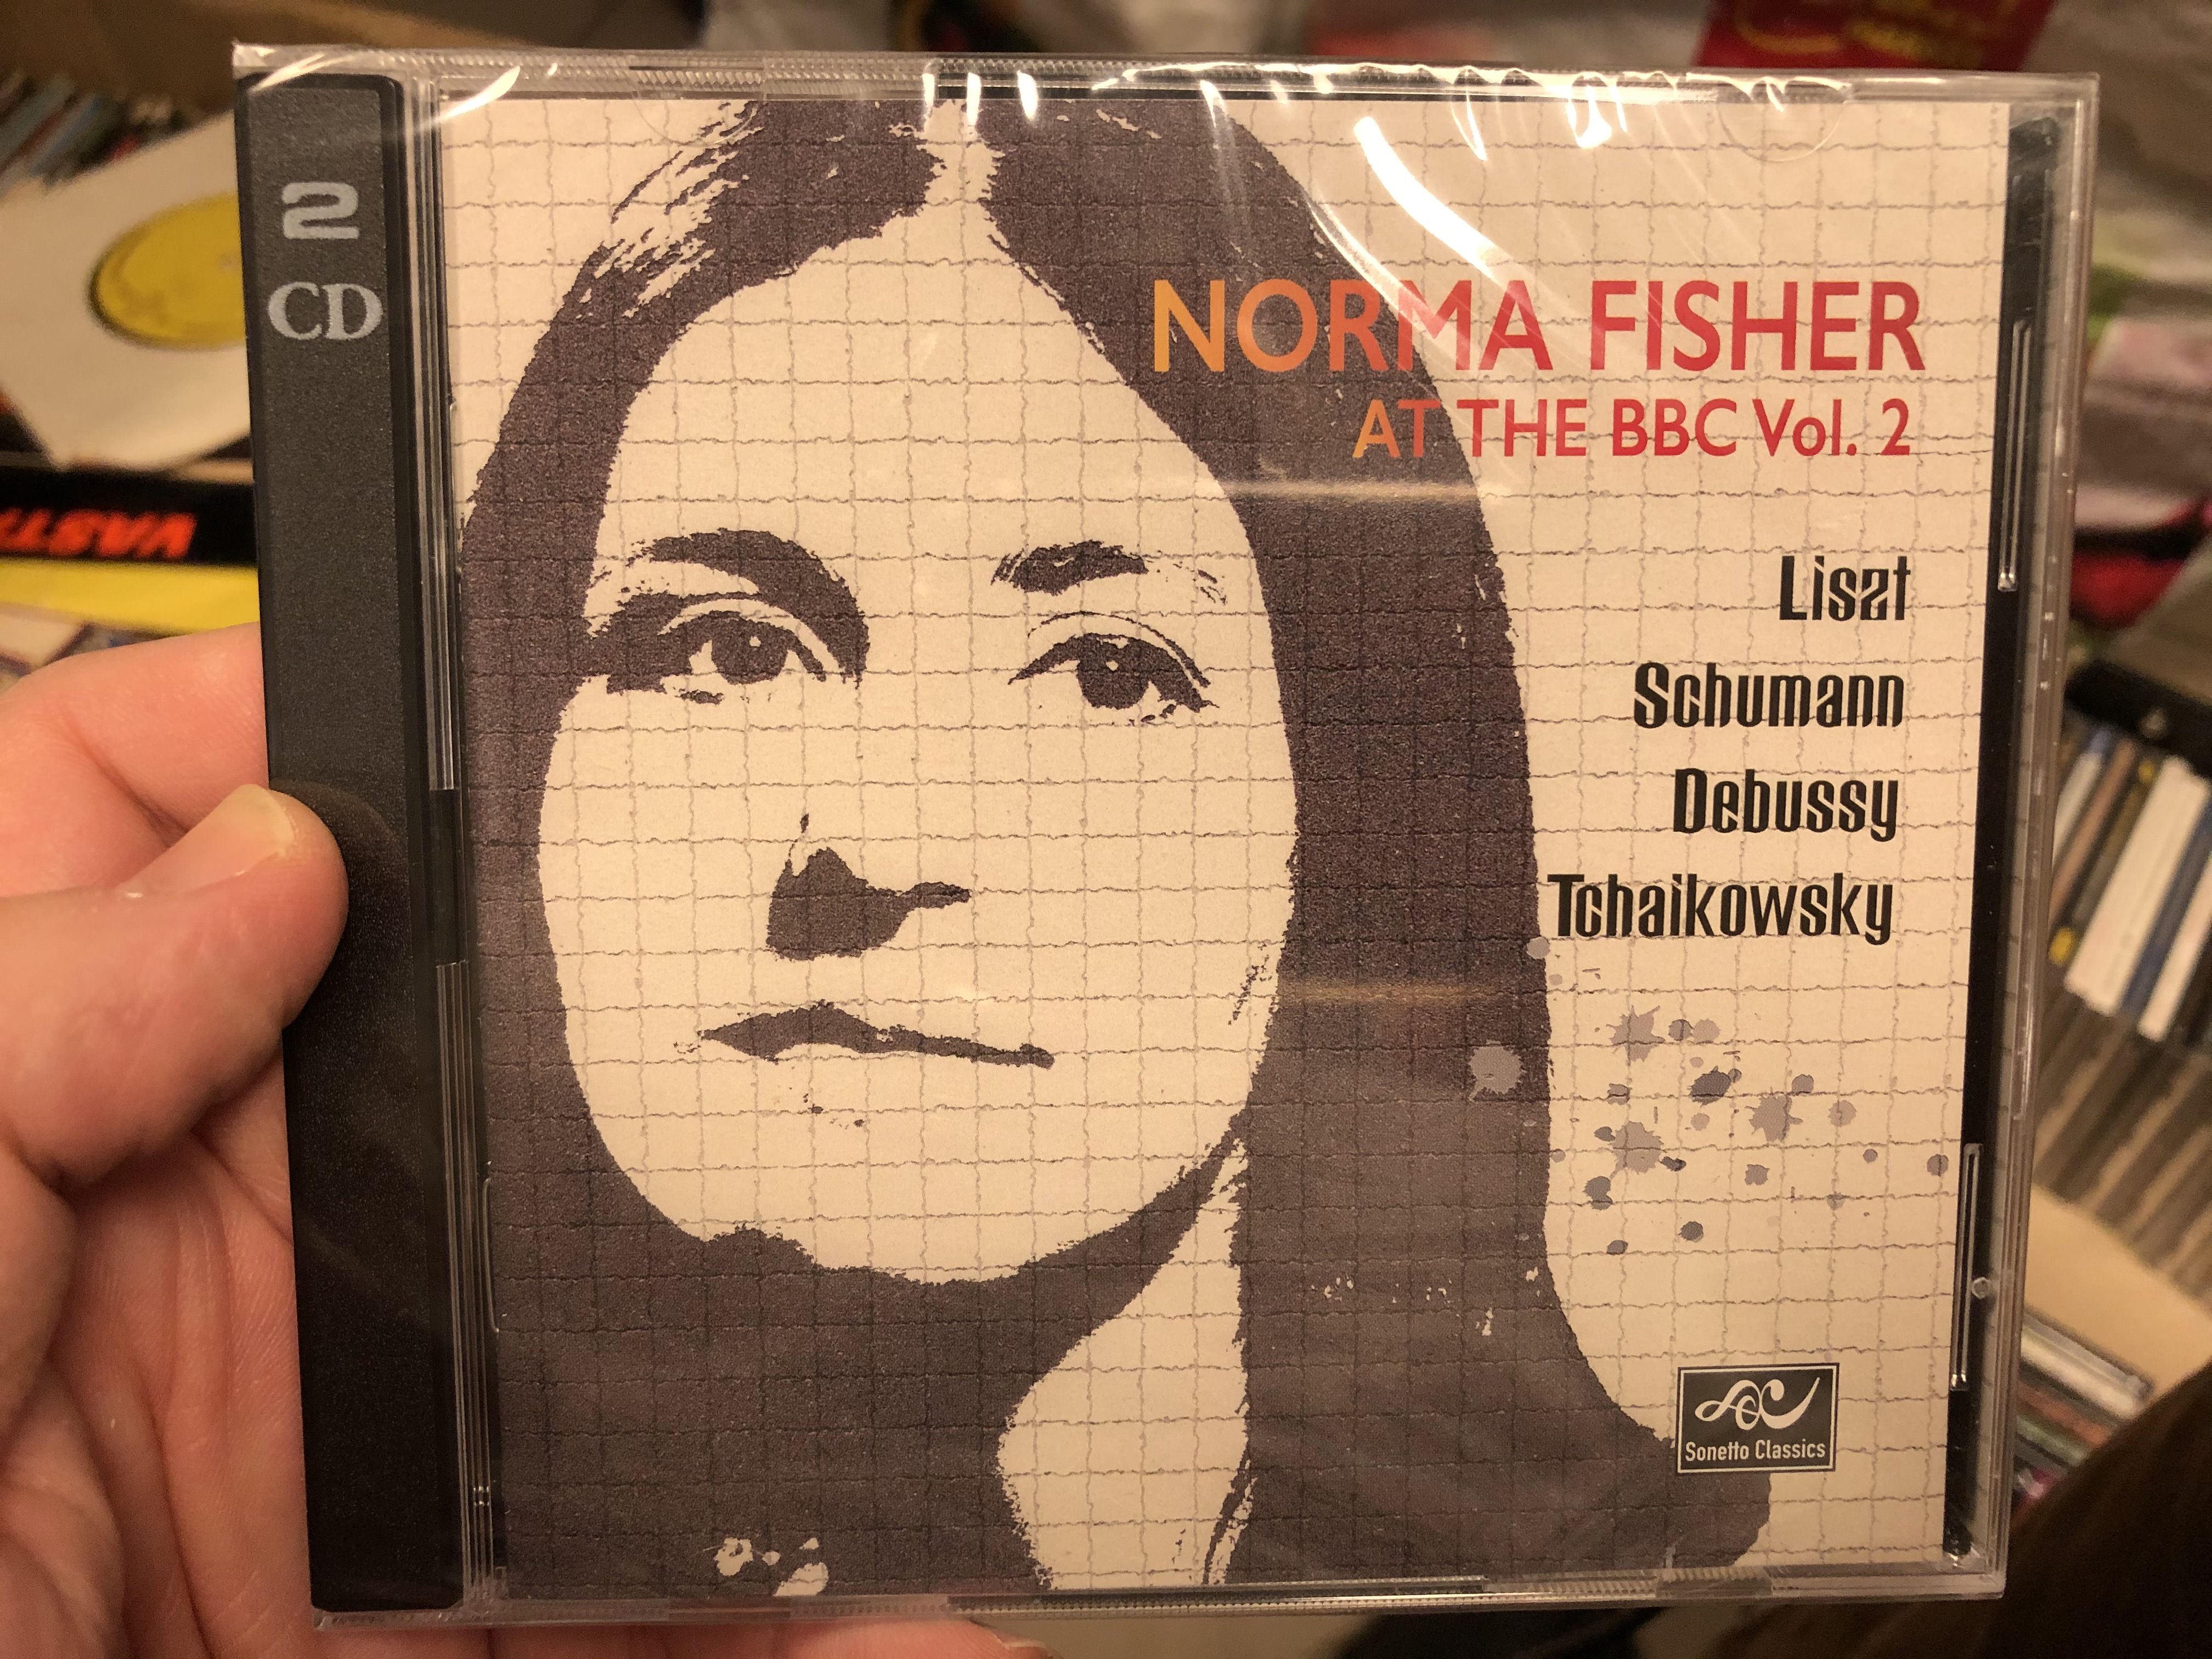 norma-fisher-at-the-bbc-vol.-2-liszt-schumann-debussy-tchaikowsky-sonetto-classics-audio-cd-2019-soncla004-1-.jpg